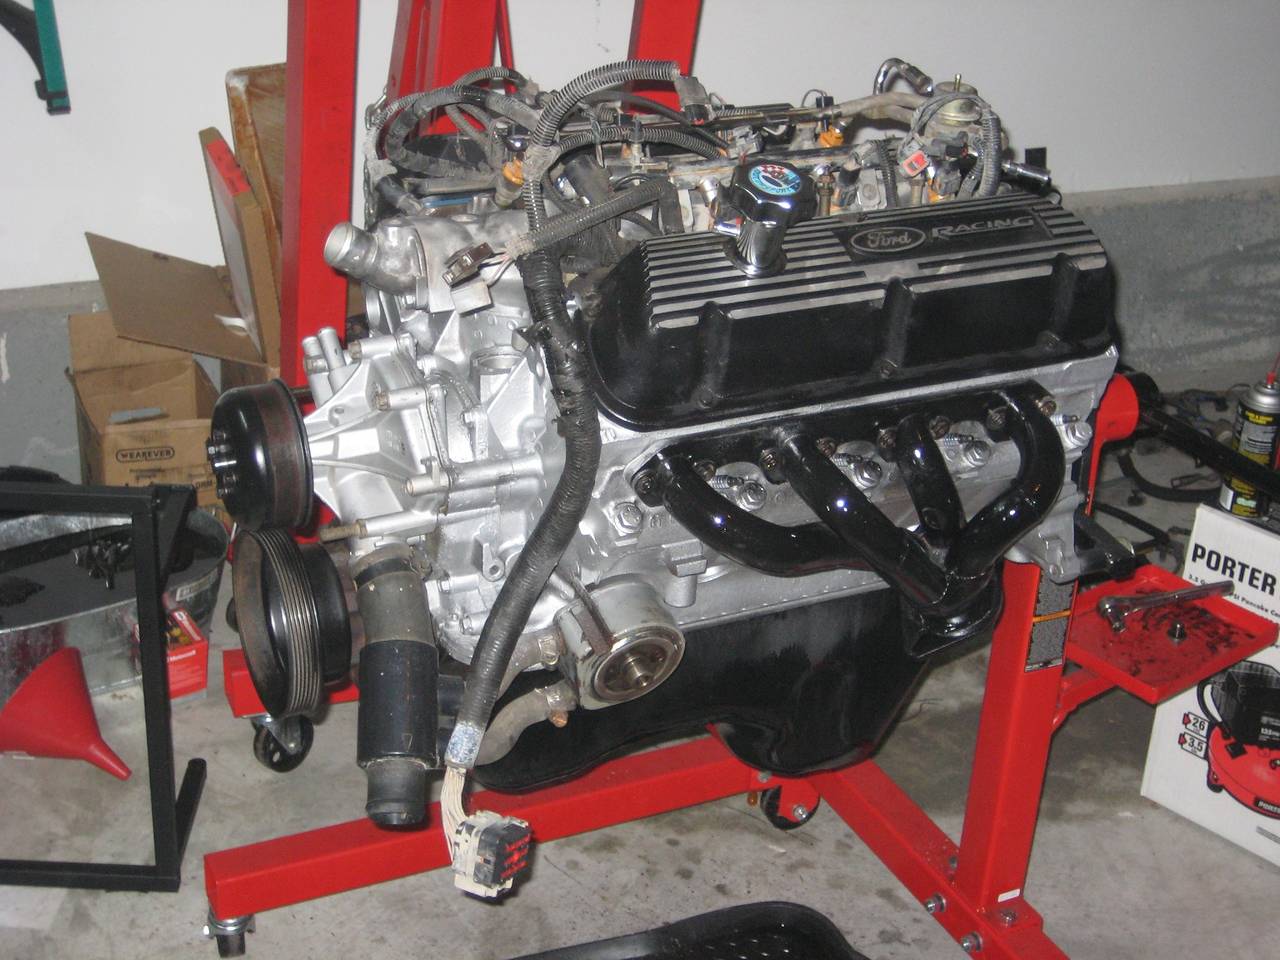 engine rebuild with paint